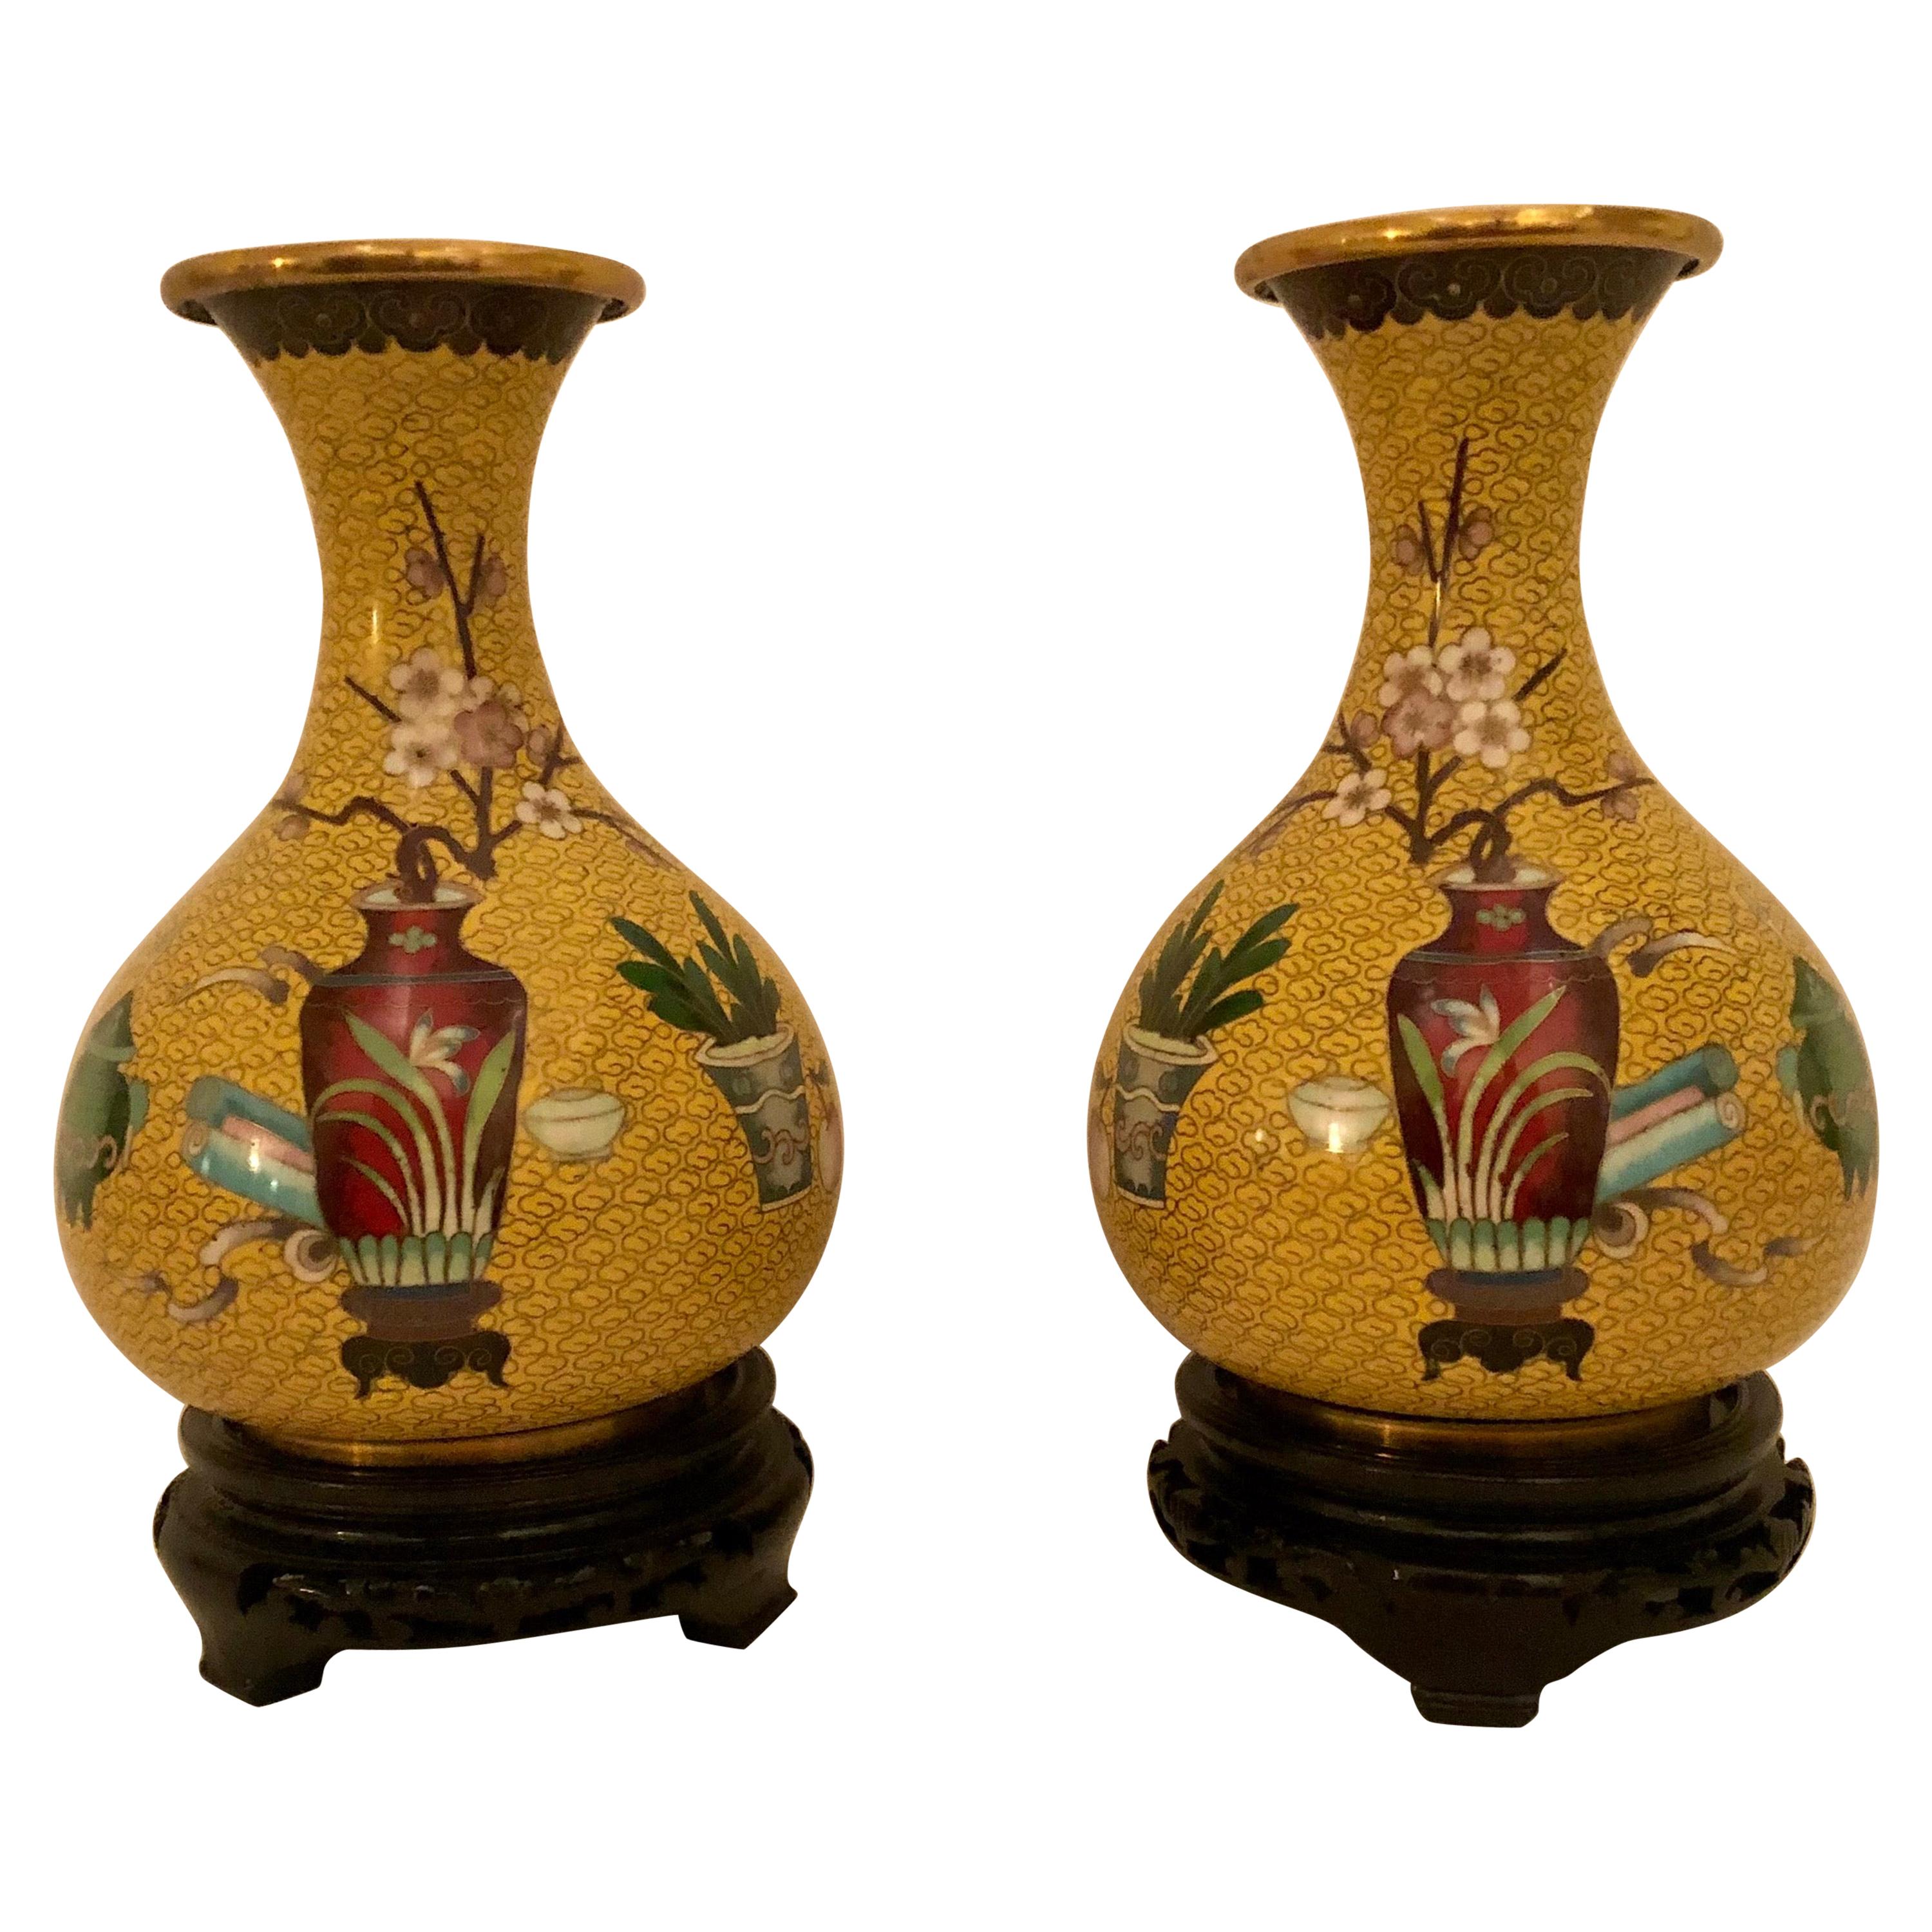 Pair of Yellow Chinese Cloisonné Vases with a Chinese Red Vase & Prunus Flowers